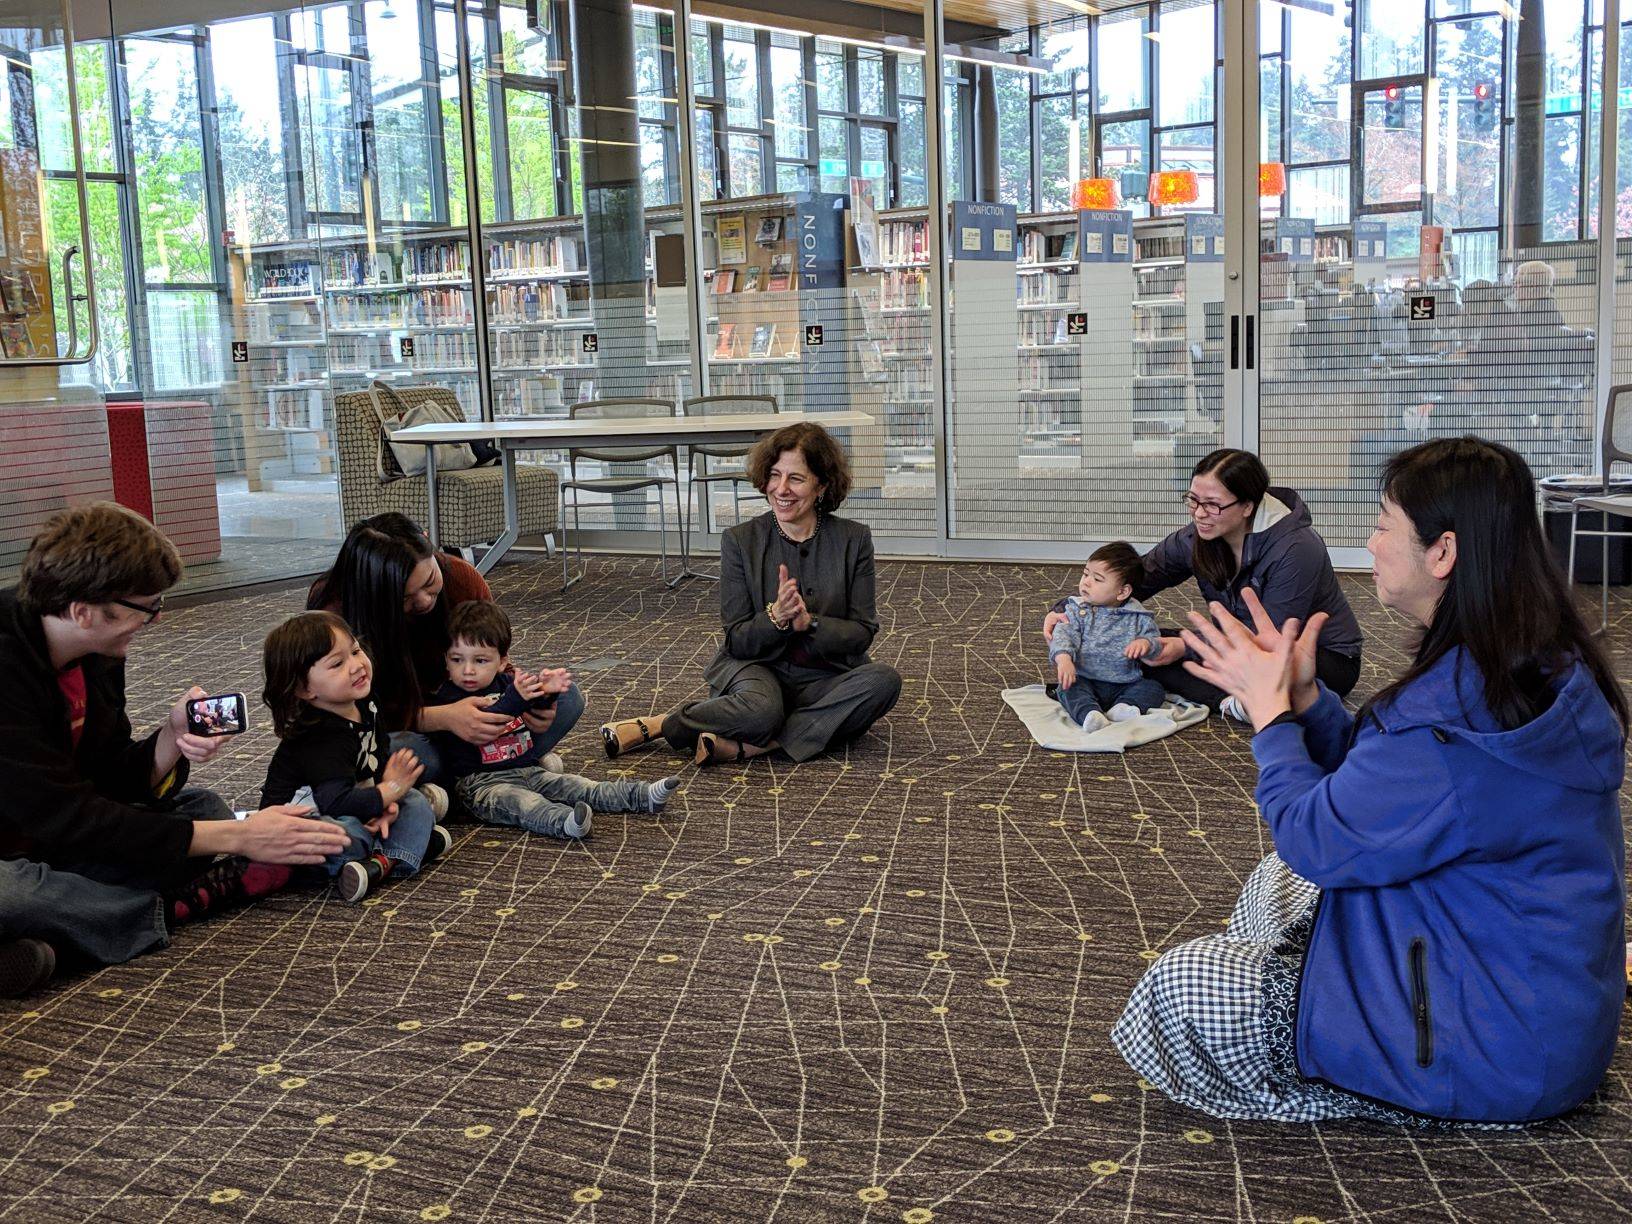 Lisa Rosenblum, executive director of the King County Library System, joins families for Story Time. COURTESY PHOTO, KCLS